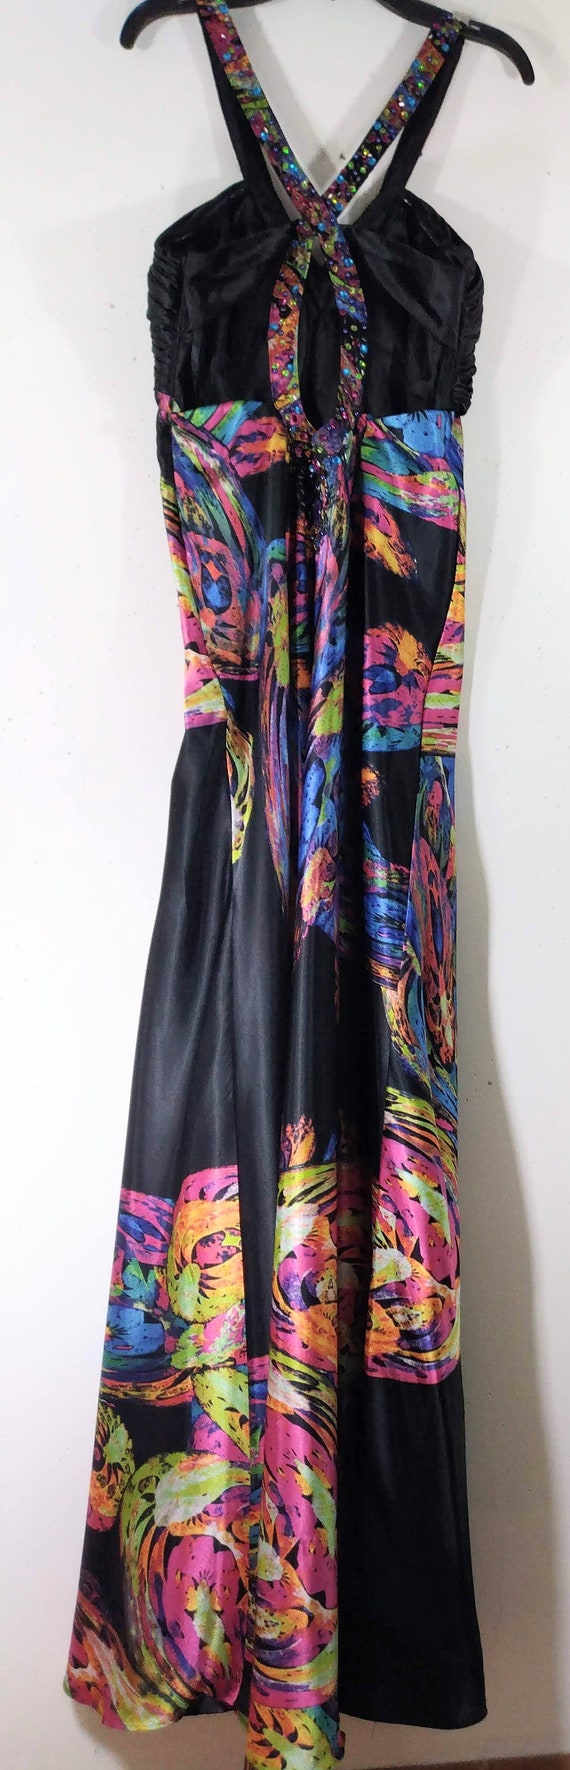 NORDSTROM Gown Women's Semi Formal Colorful Wild … - image 10